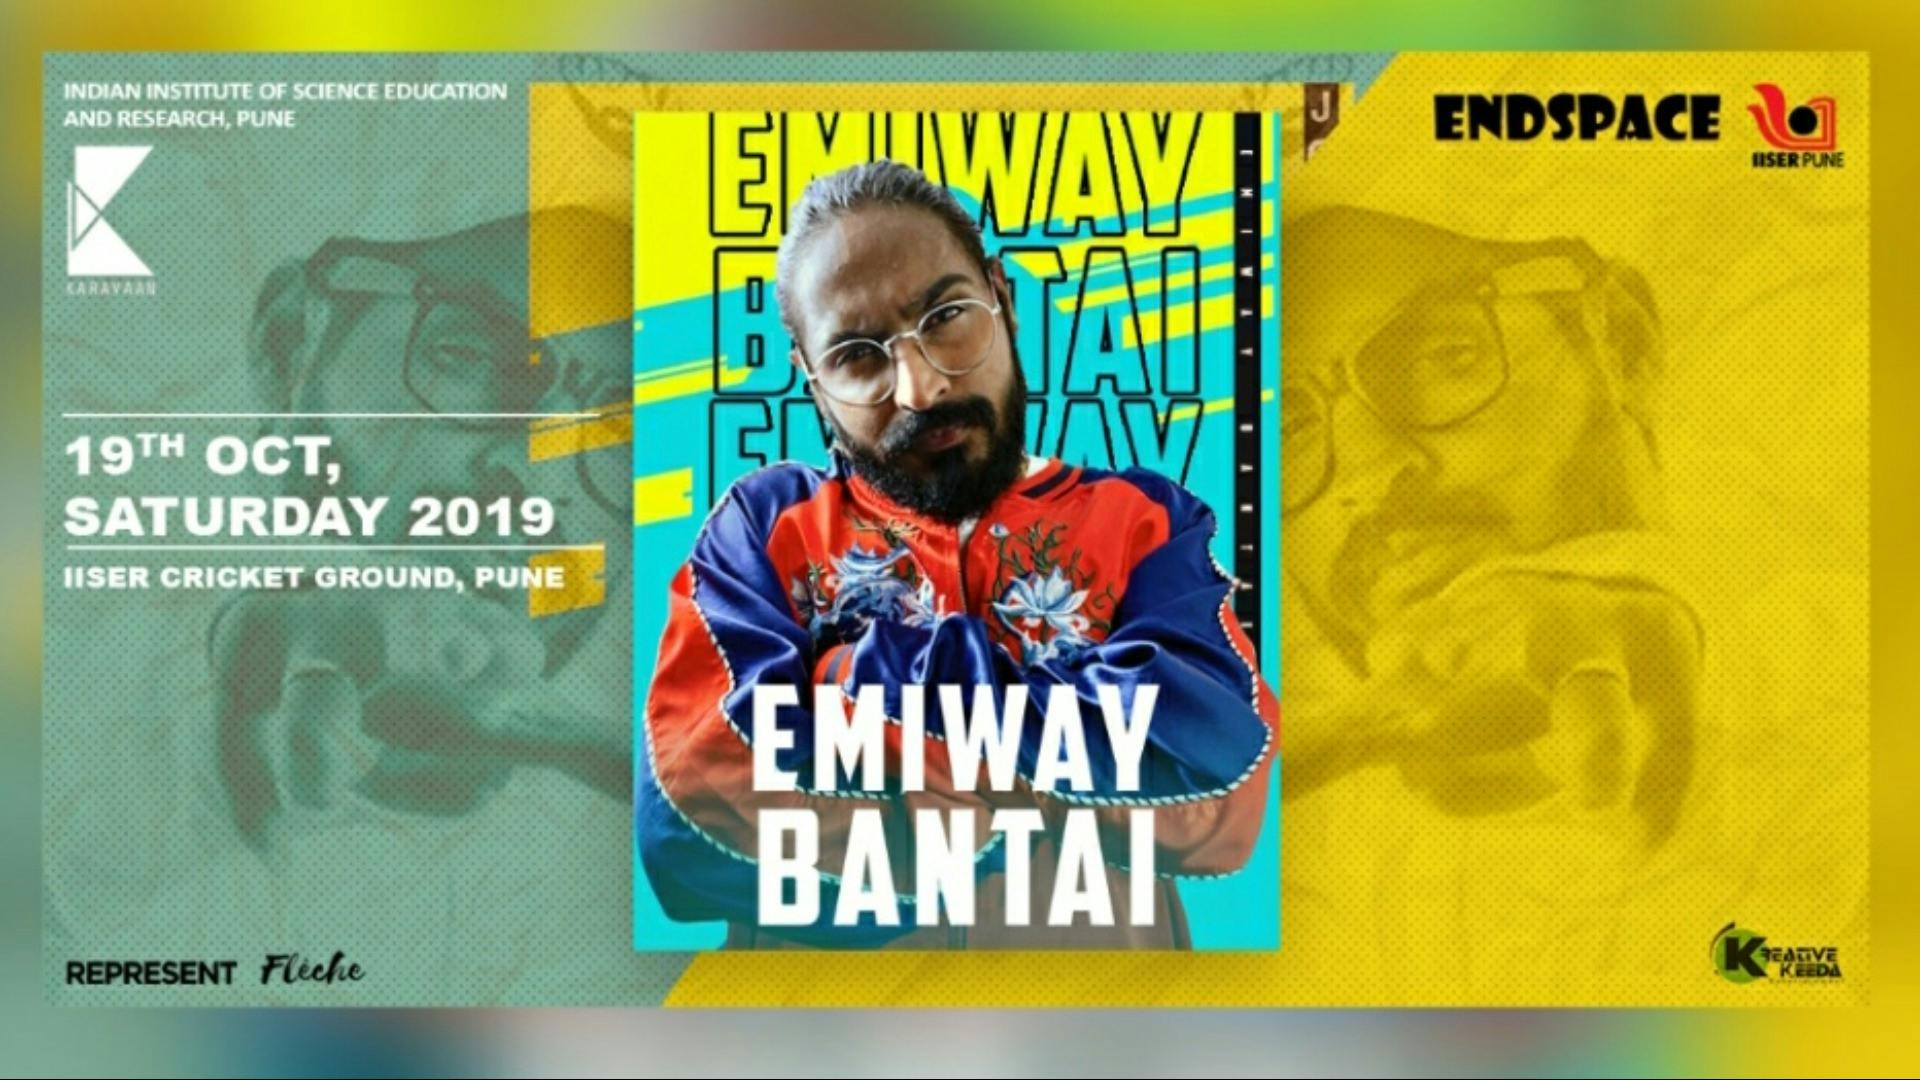 Emiway Bantai Shows, Tickets and More. Follow Now!